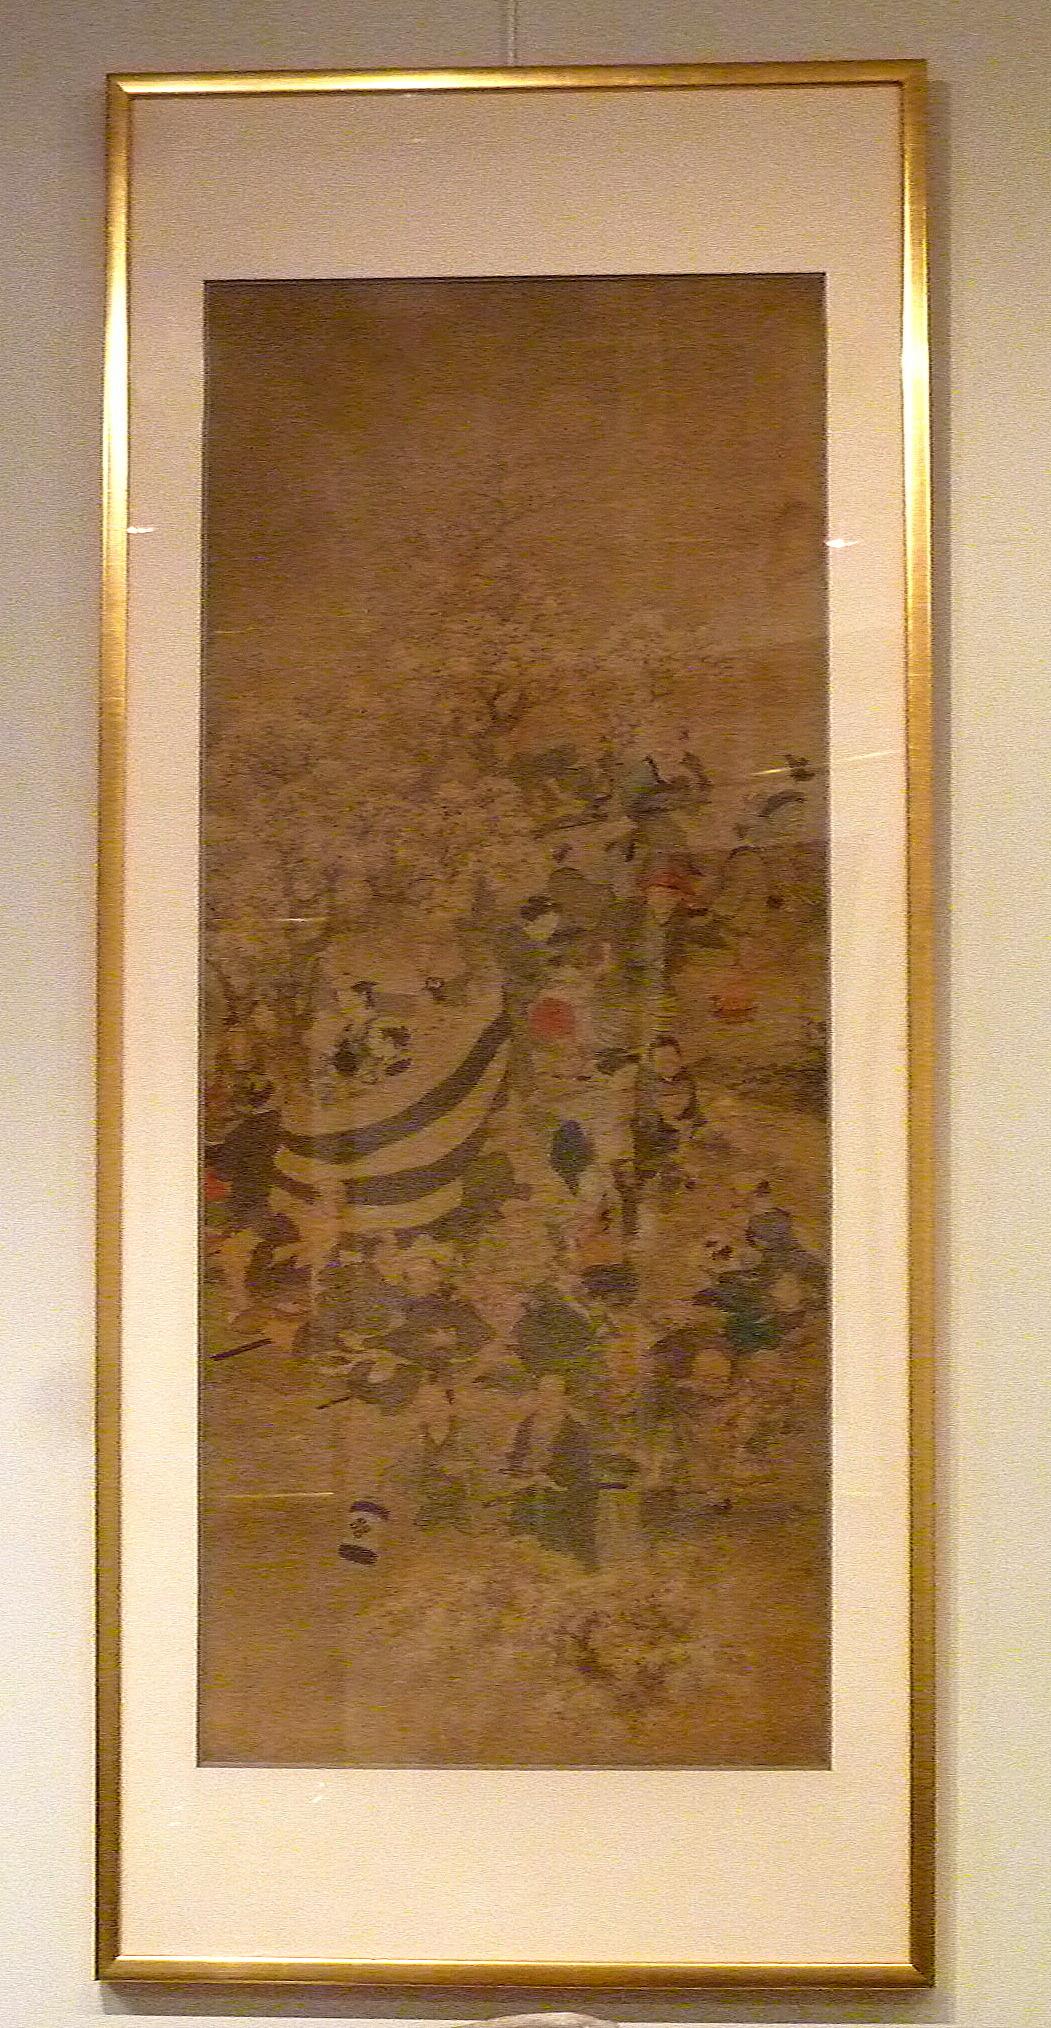 Fine Japanese brush painting of cherry blossom festival, ink and color on silk, 19th century, museum conservation framed.
Overall size: 68